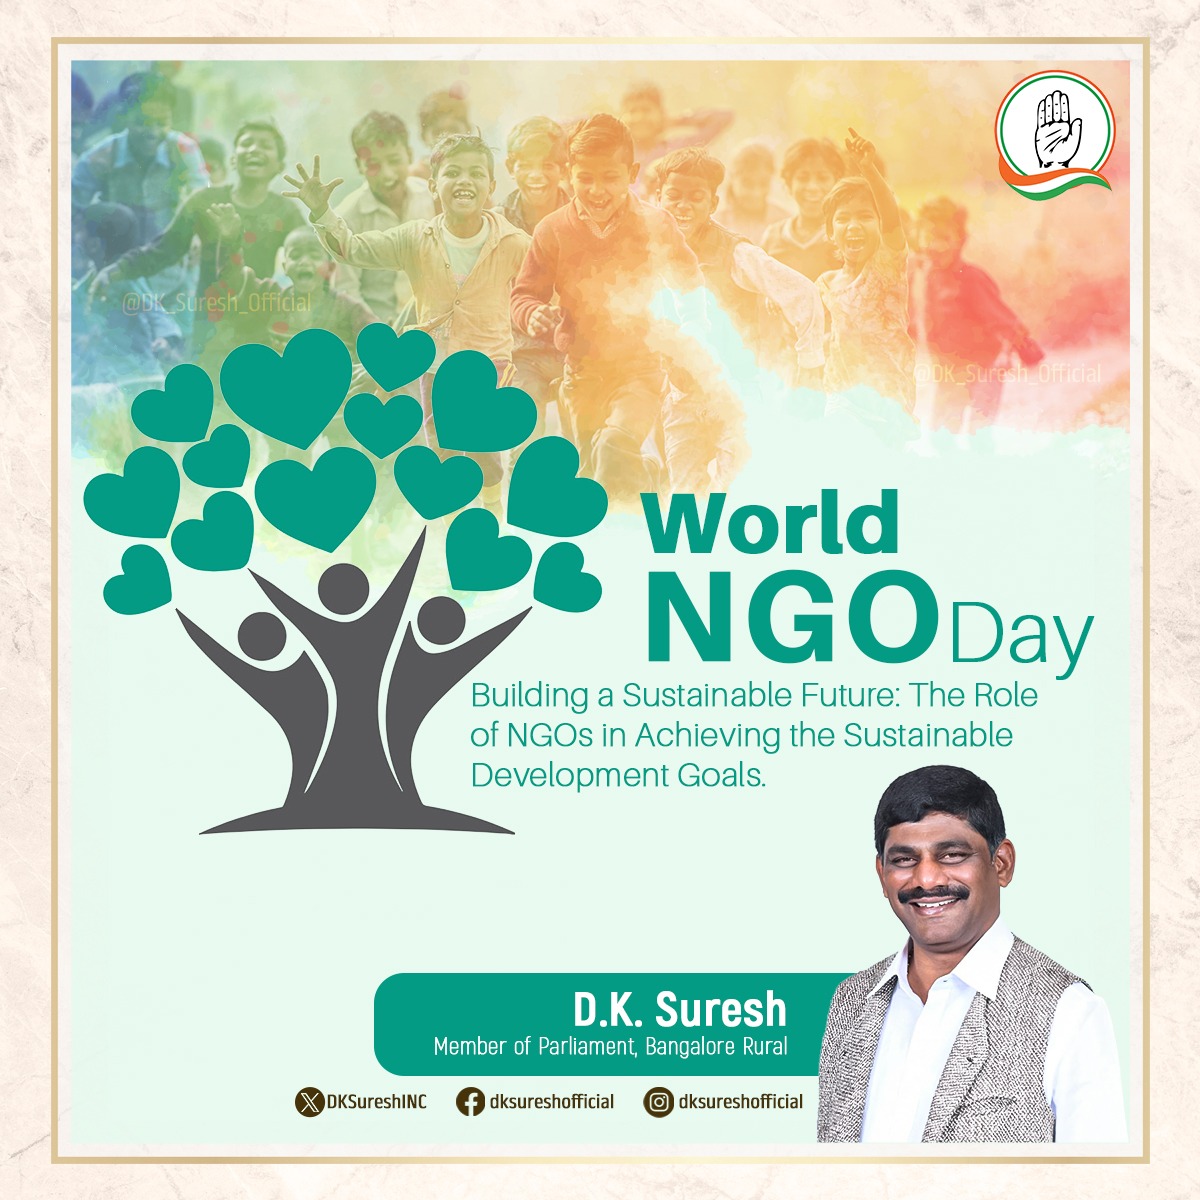 The best way to find yourself is to lose yourself in the service of others. On this #WorldNGODay, Let us thank every NGO that is working selflessly and tirelessly to better our society. I admire your extensive dedication to humanitarian services to make the world a better place.